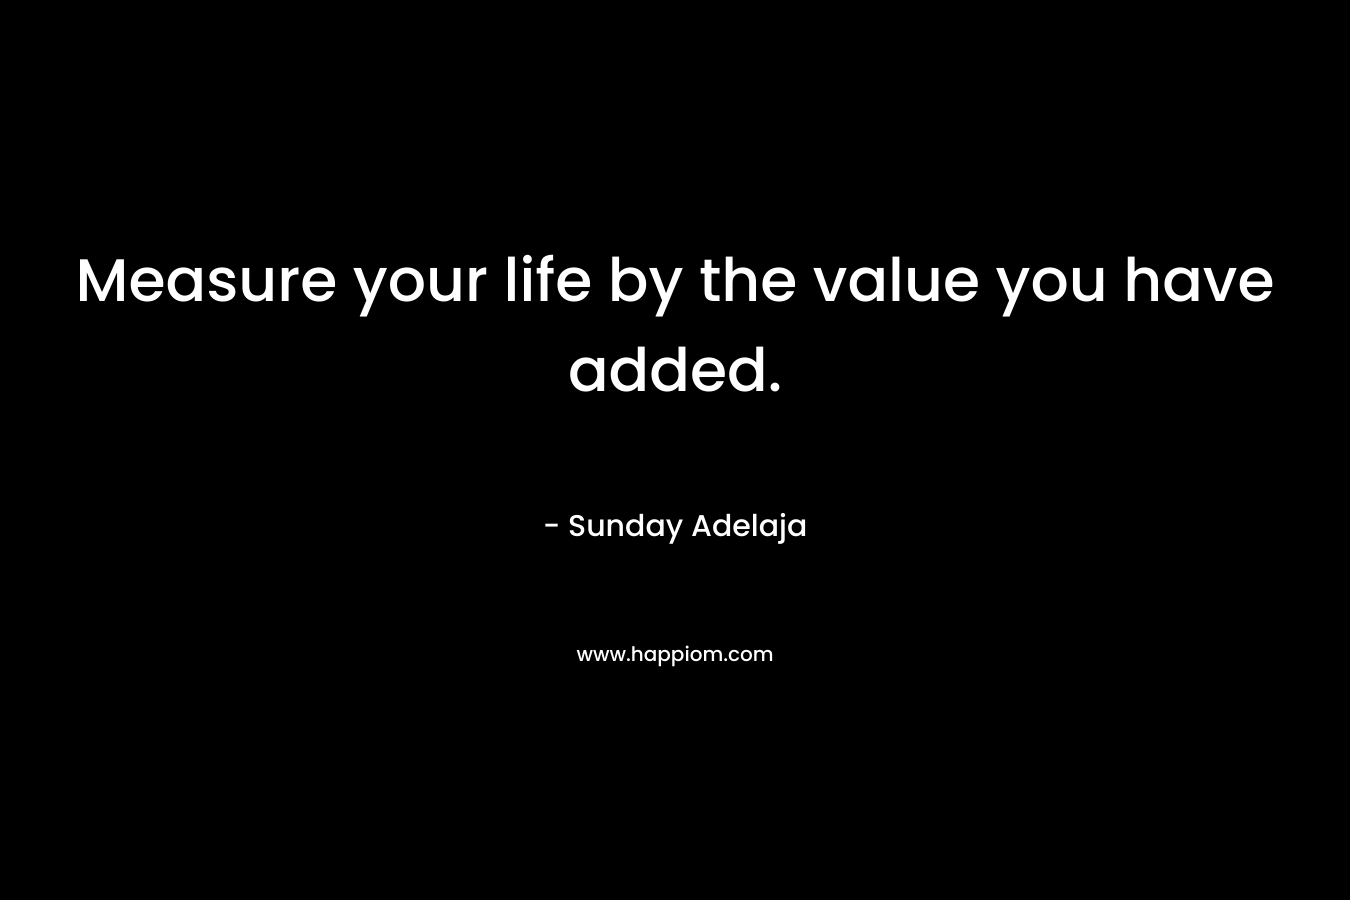 Measure your life by the value you have added.